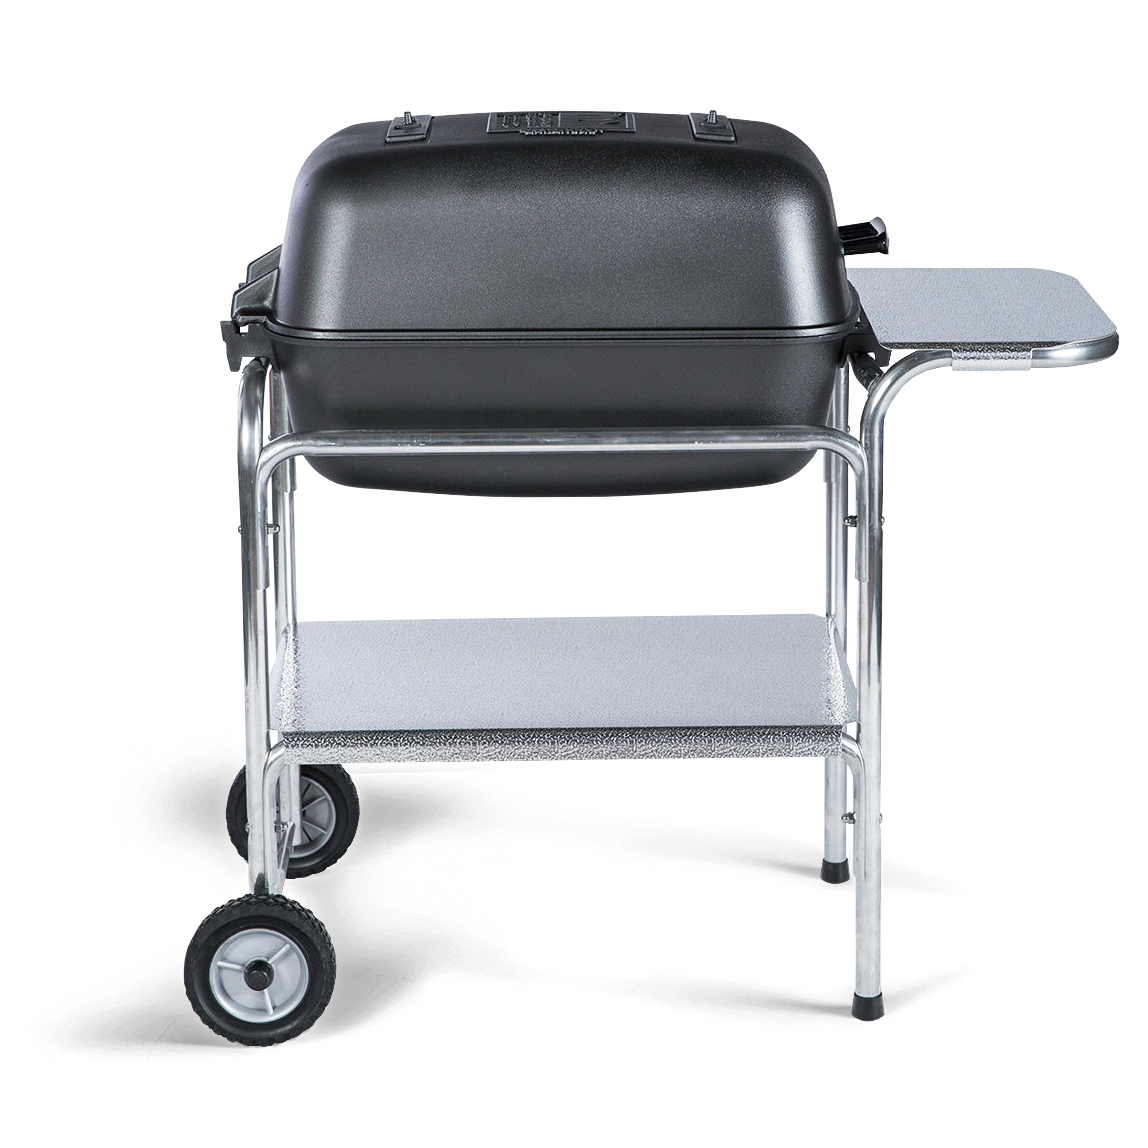 PK Portable Kitchen Charcoal Grill and Smoker